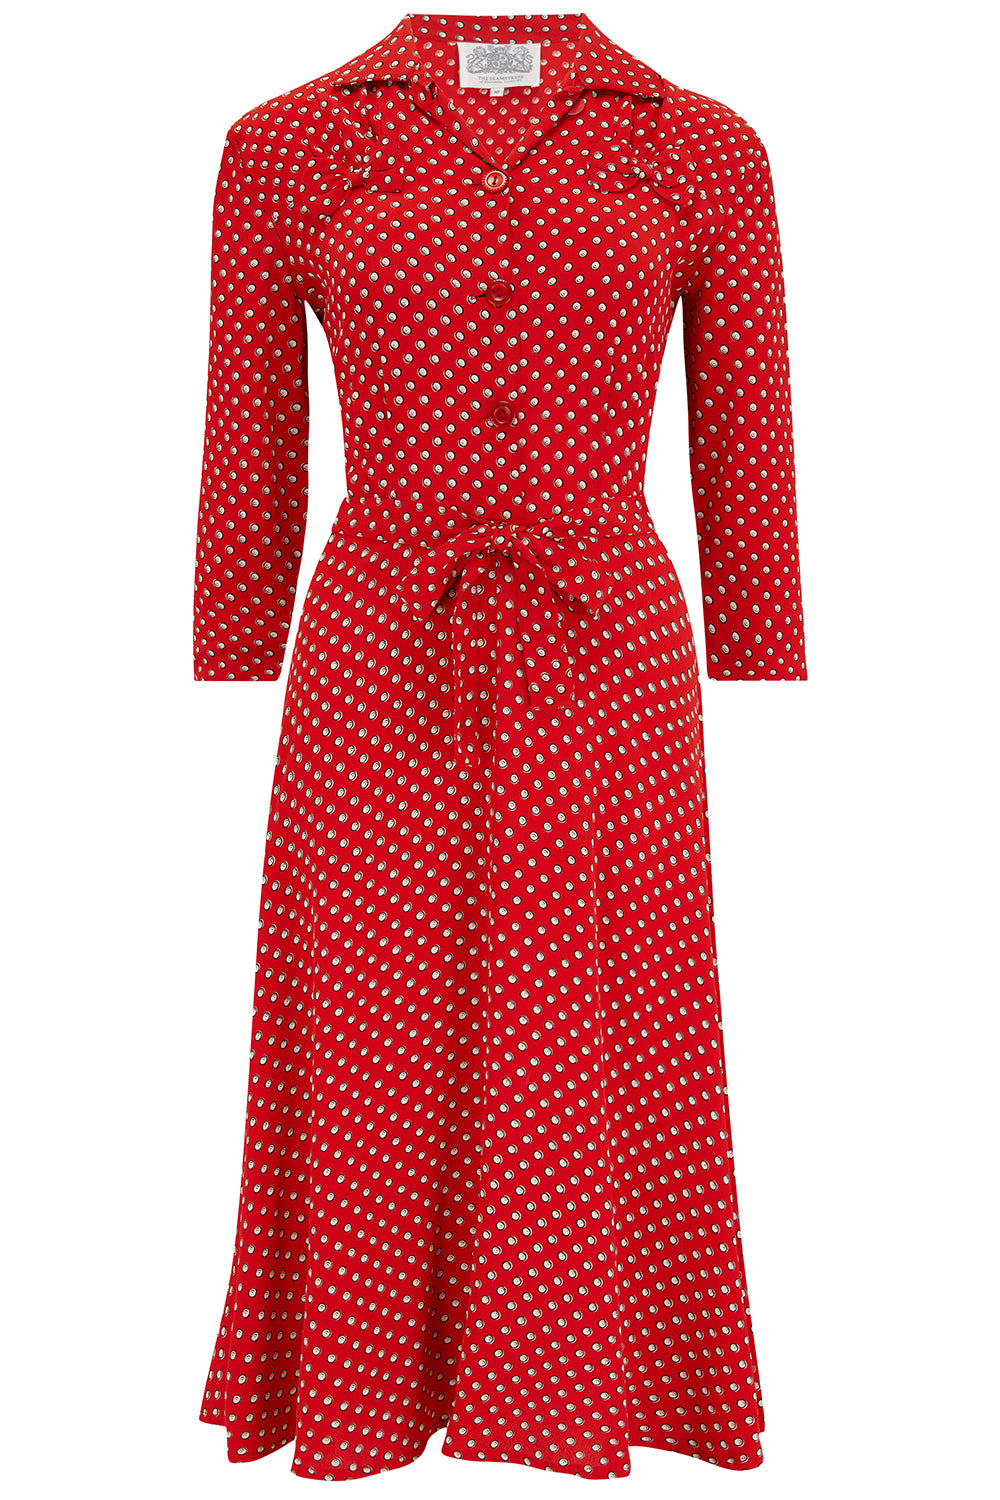 Polly Dress CC41 in Red Ditzy , Classic 1940s True Vintage Style - CC41, Goodwood Revival, Twinwood Festival, Viva Las Vegas Rockabilly Weekend Rock n Romance The Seamstress of Bloomsbury